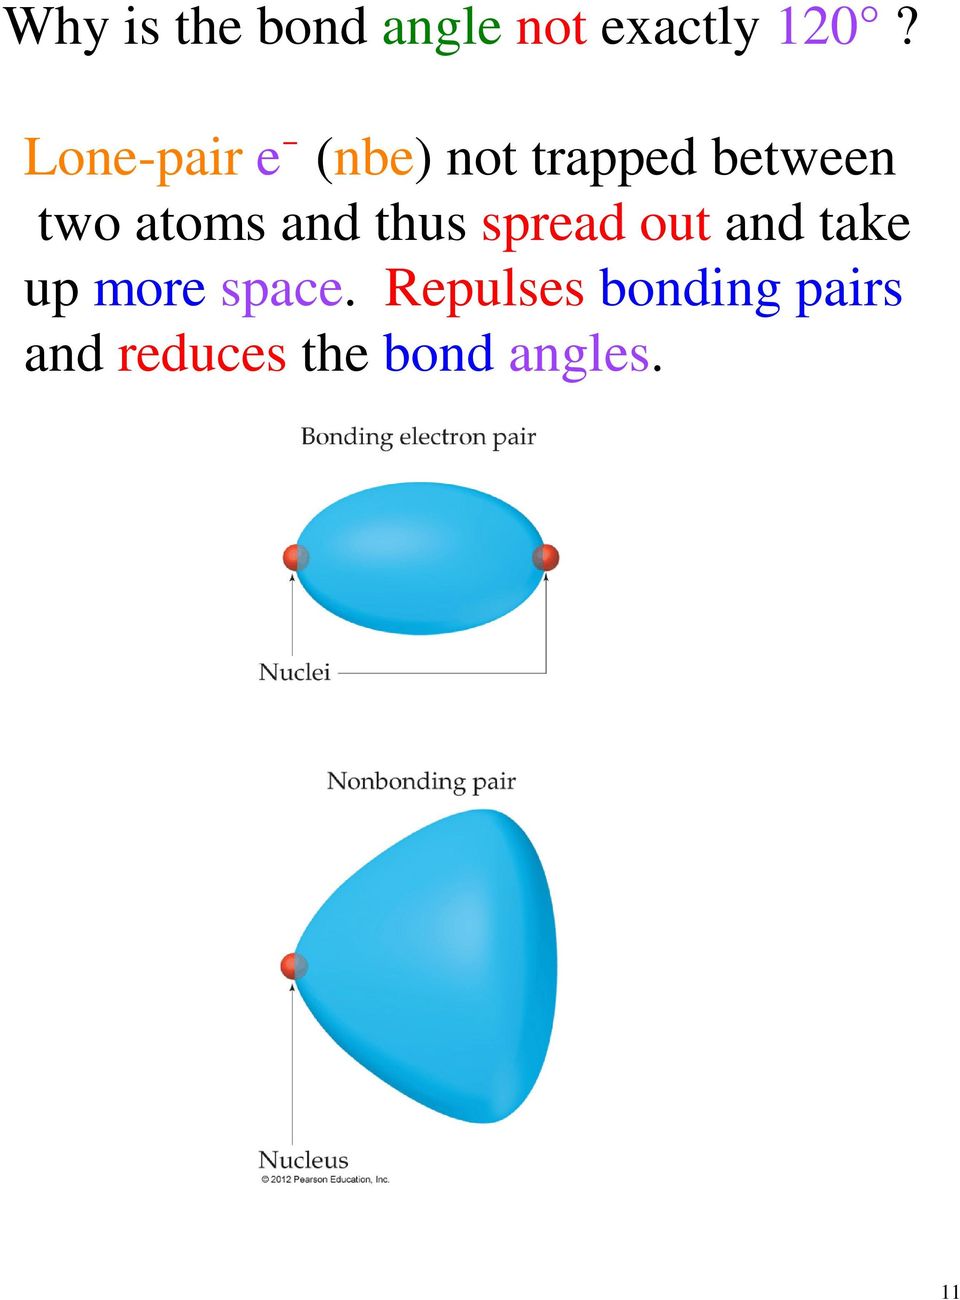 (nbe) not trapped between two atoms and thus